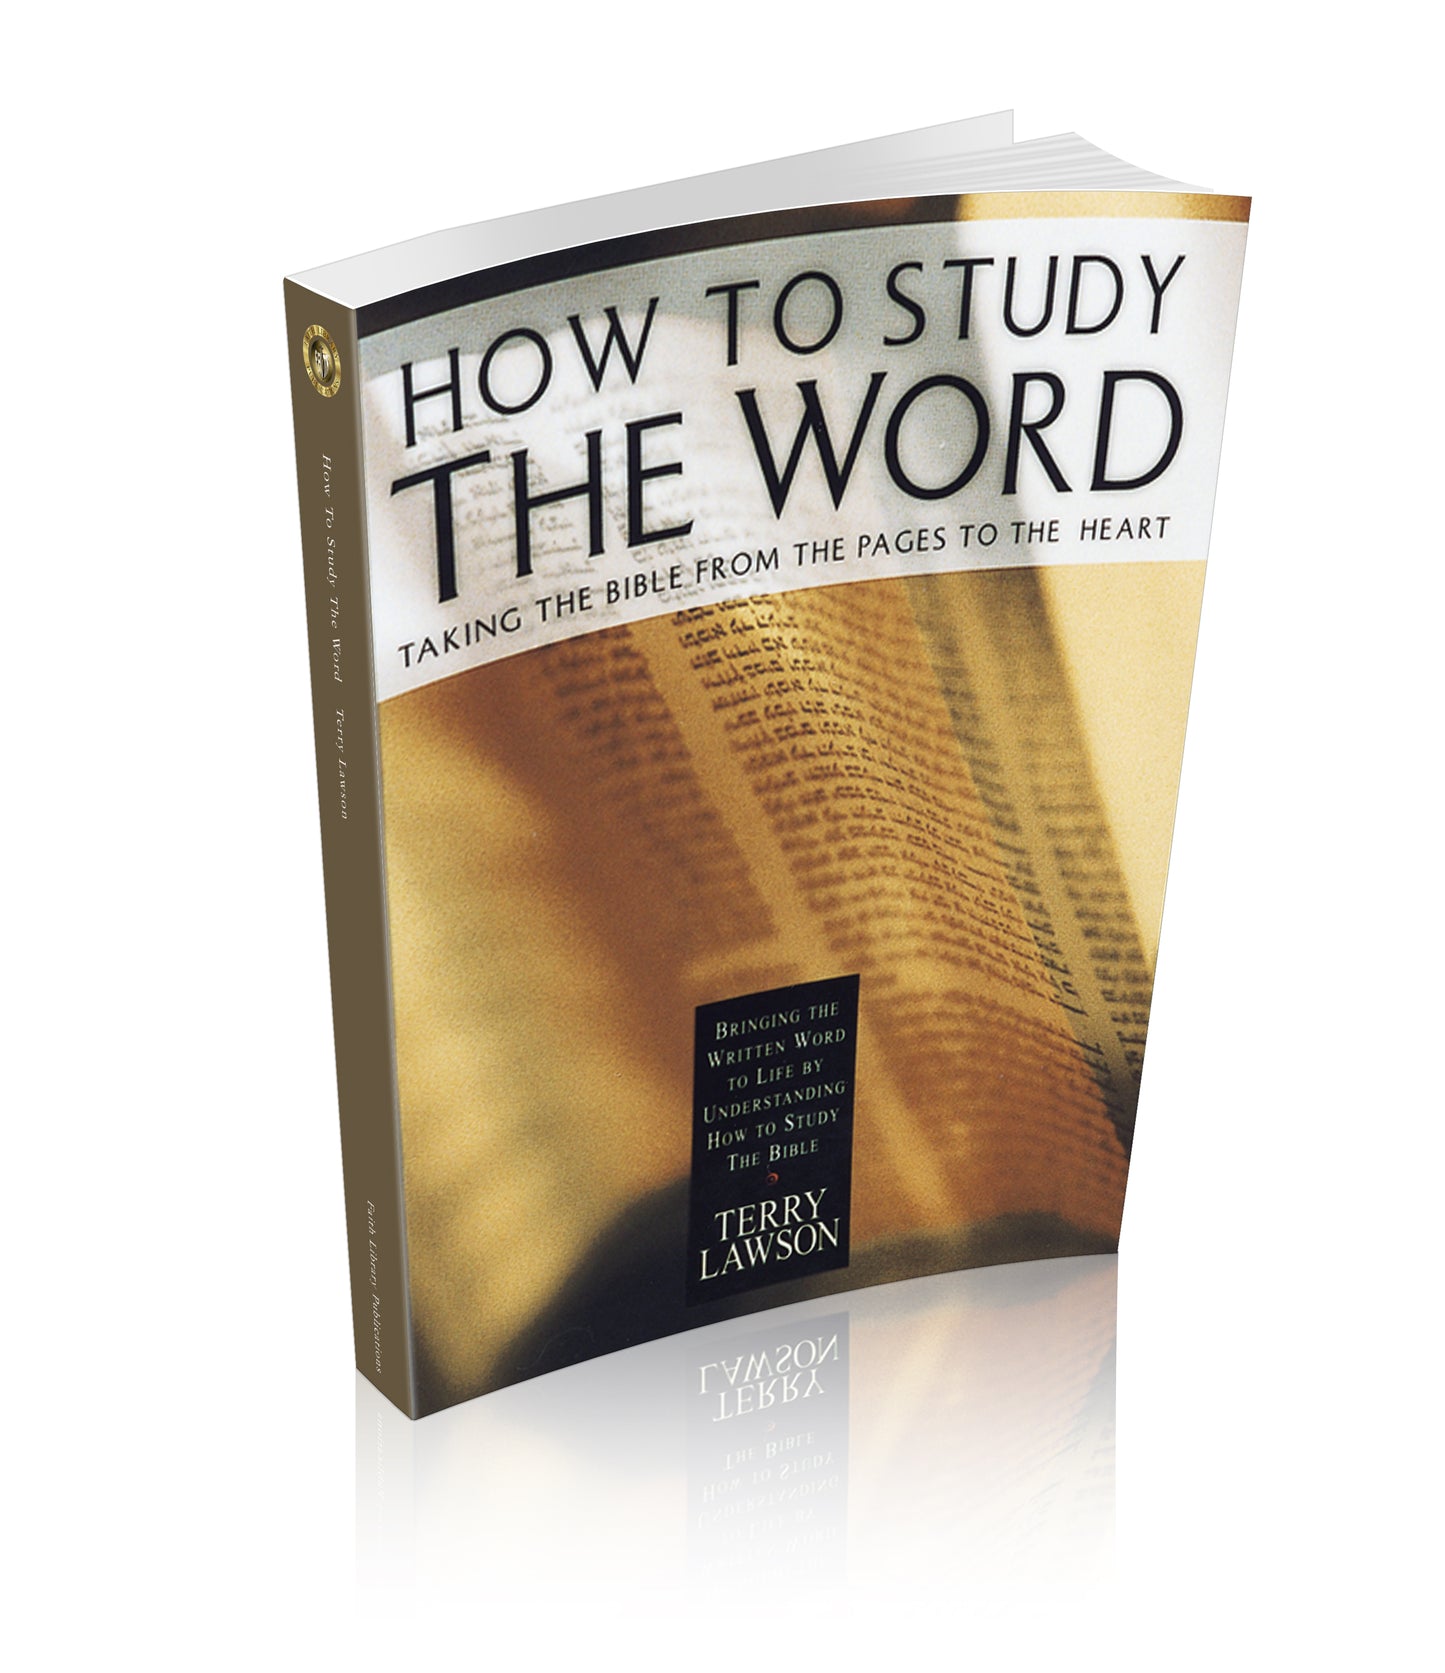 How to Study the Word: Taking the Bible From the Pages to the Heart